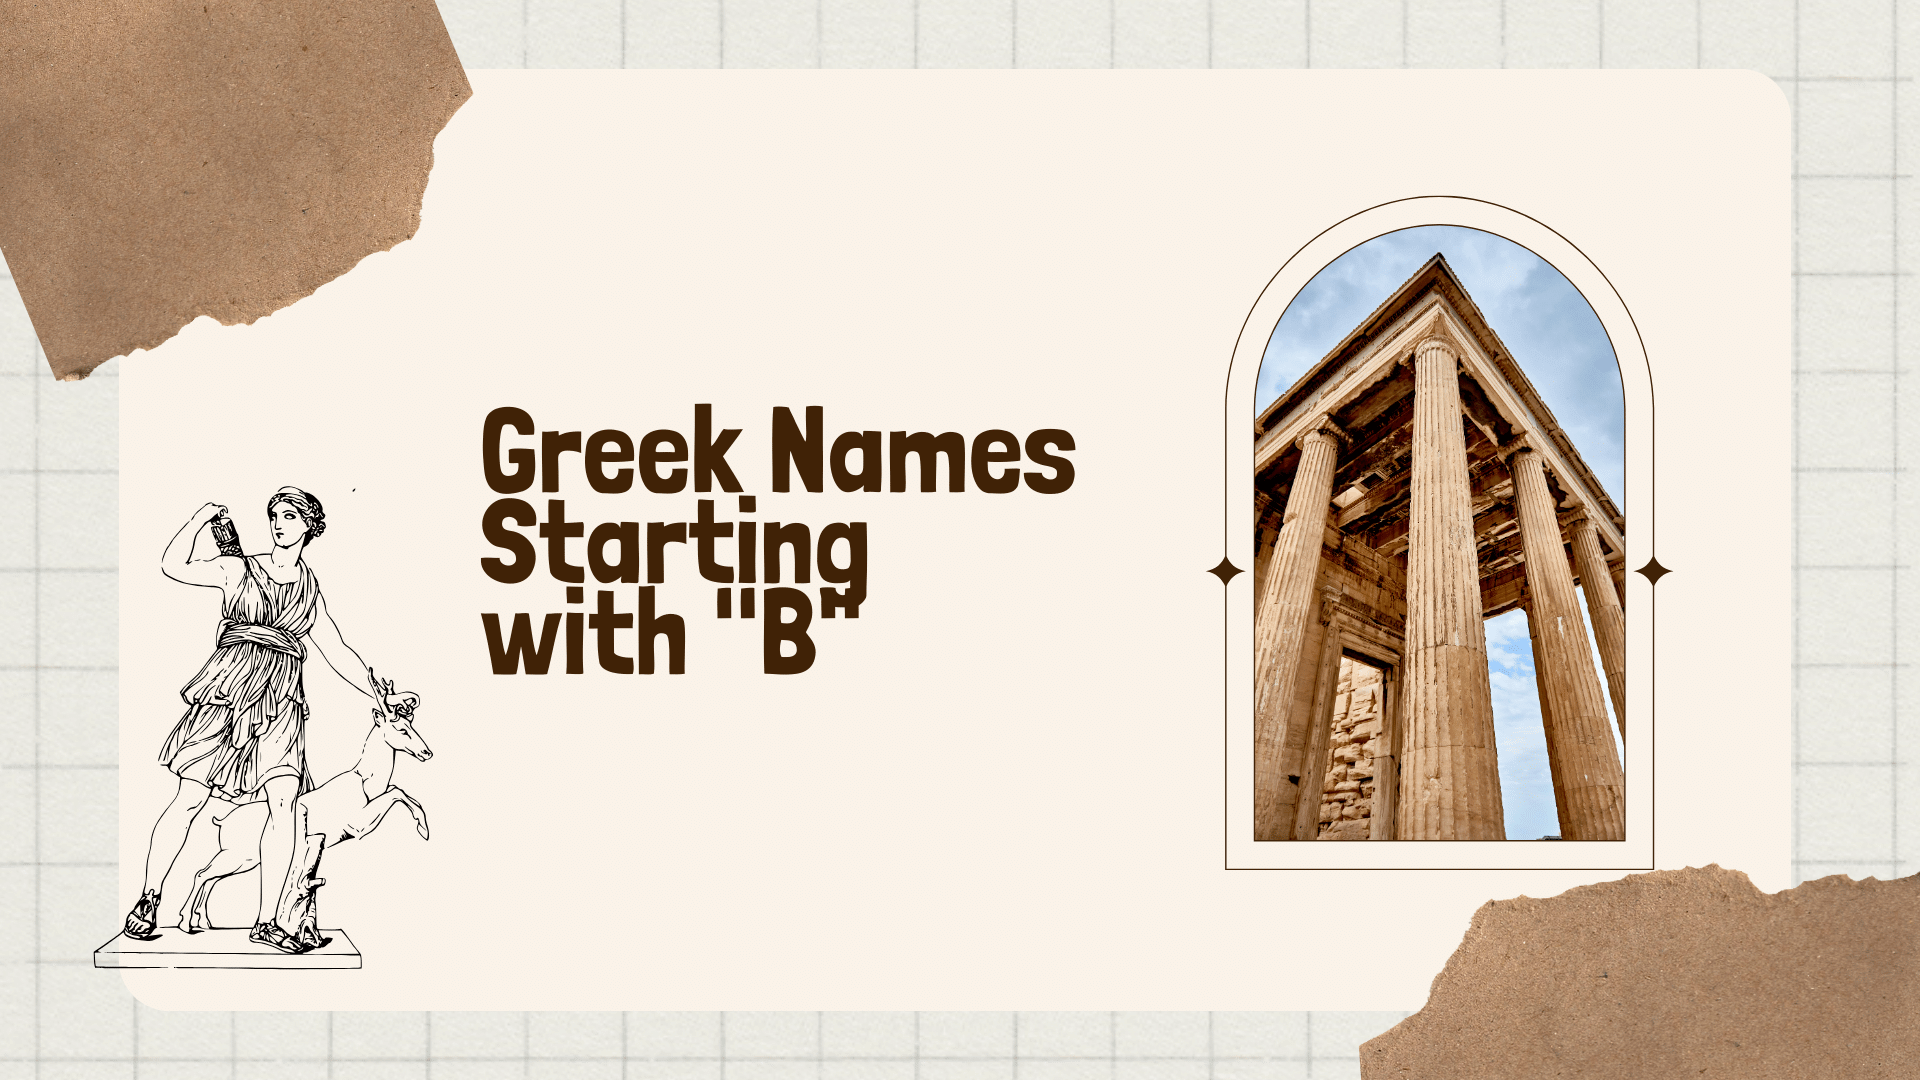 Greek Names Starting With "B"